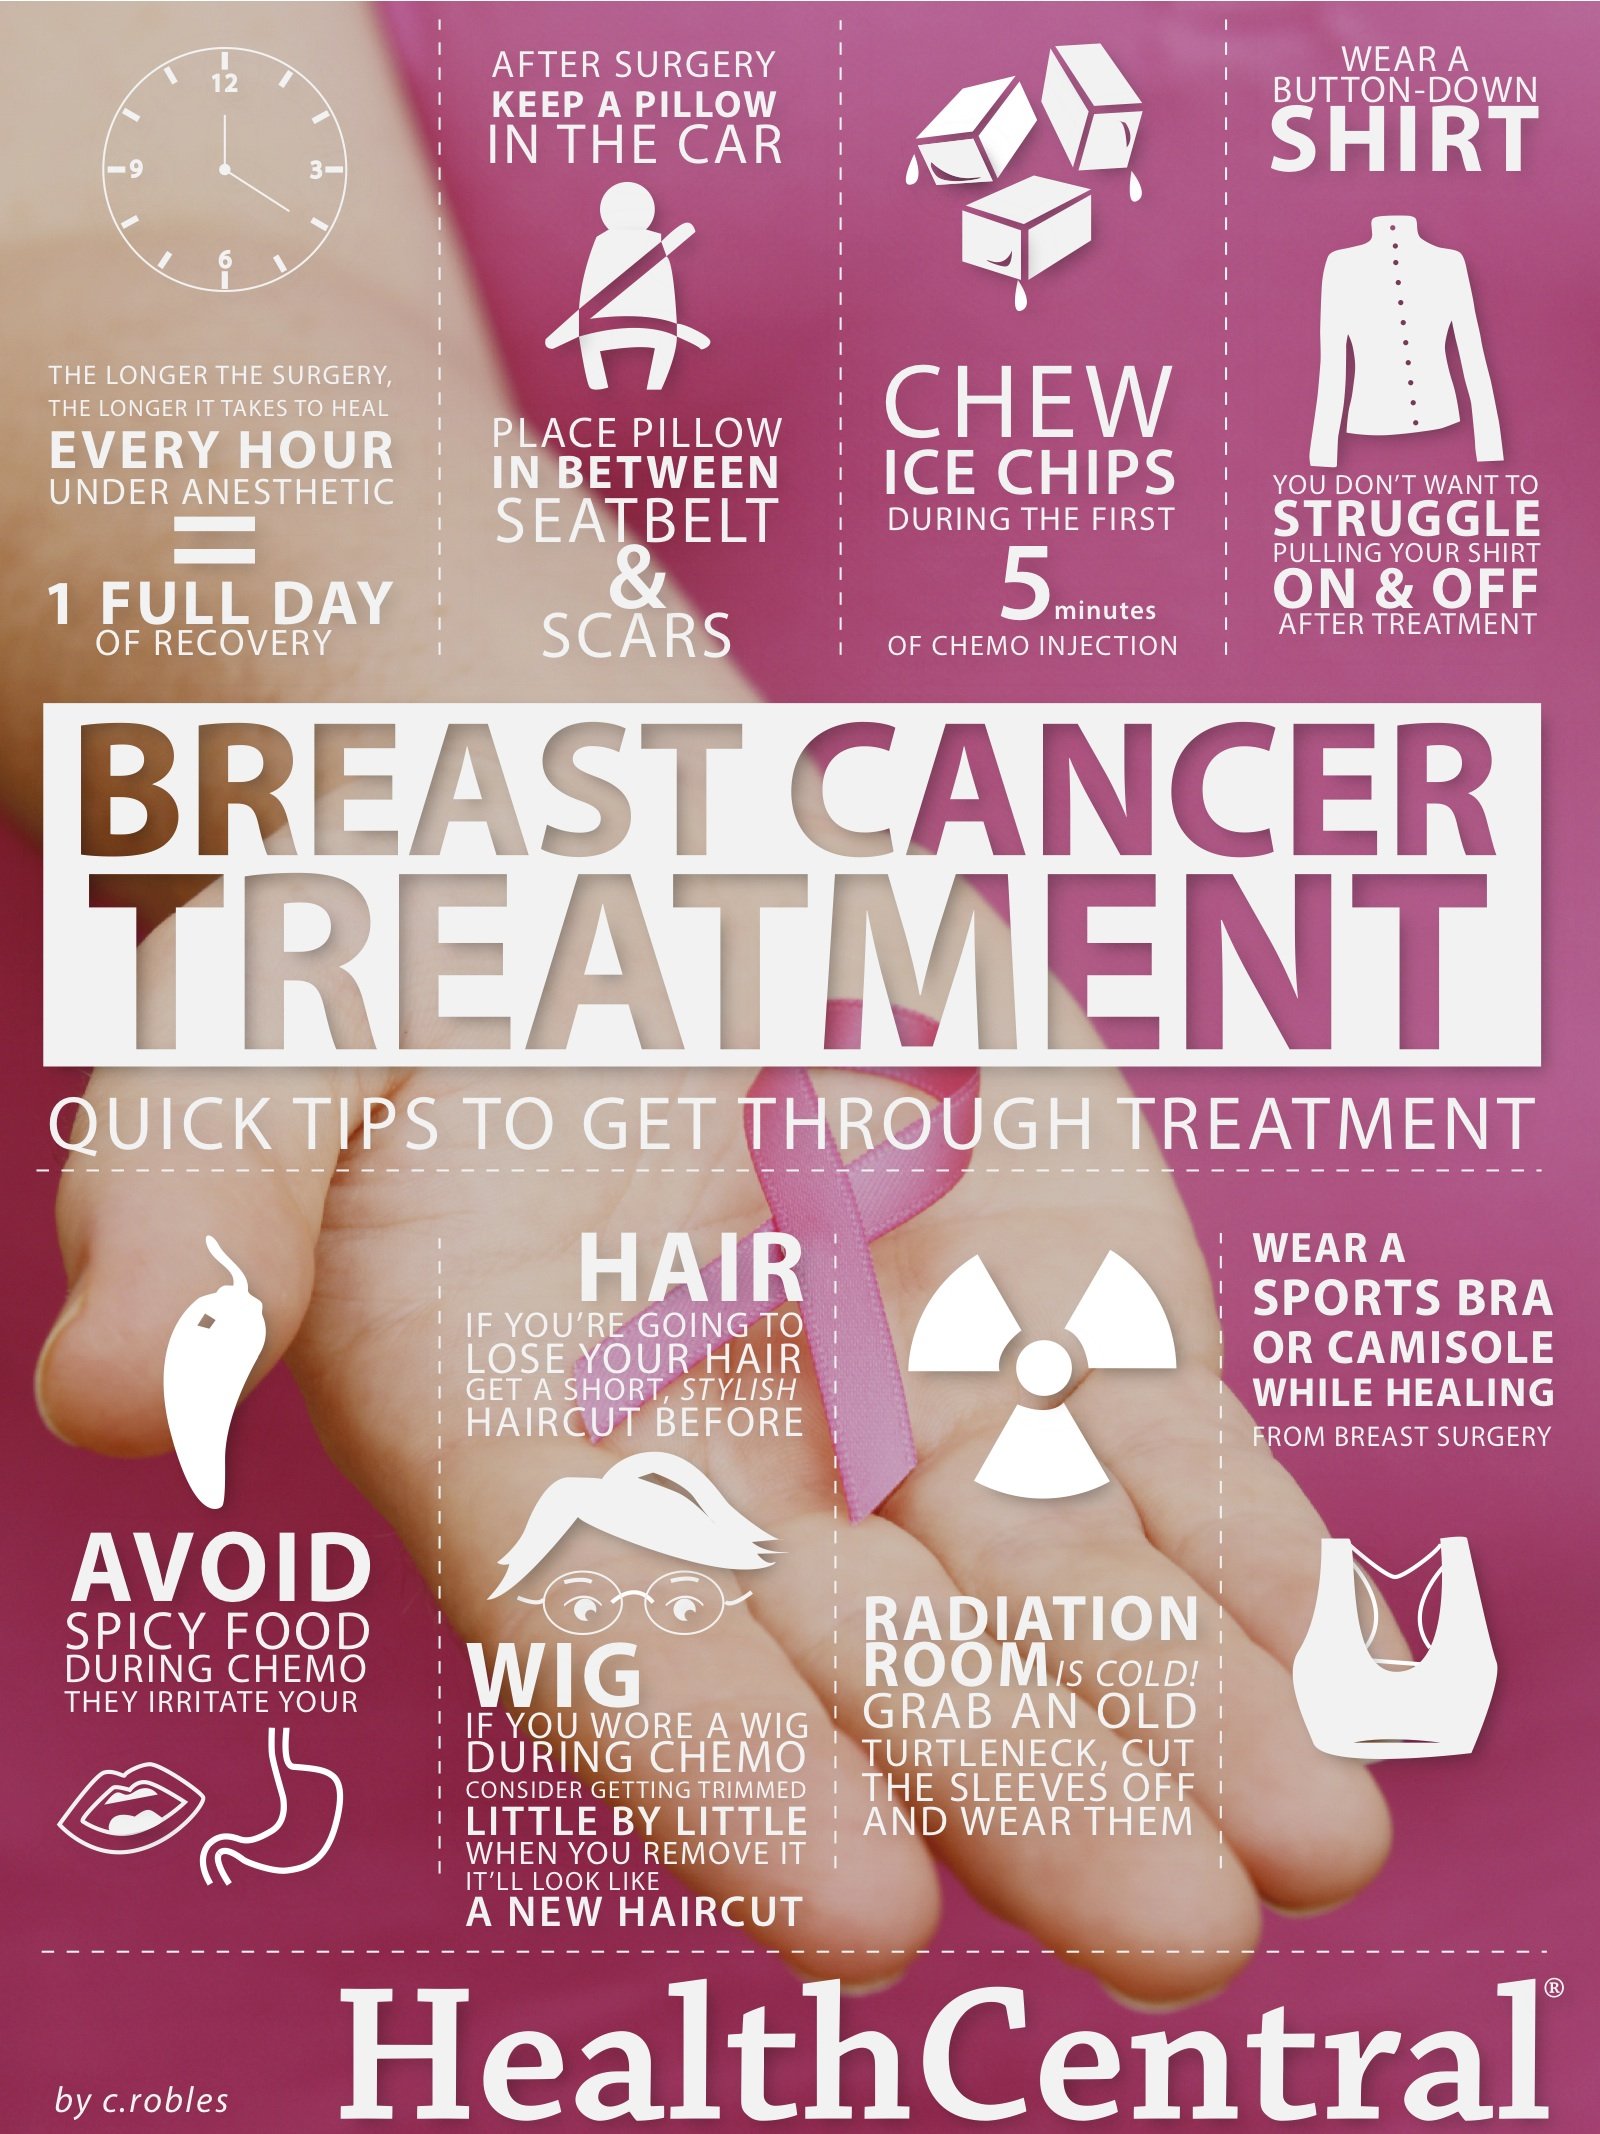 Breast Cancer Treatment Tips: It